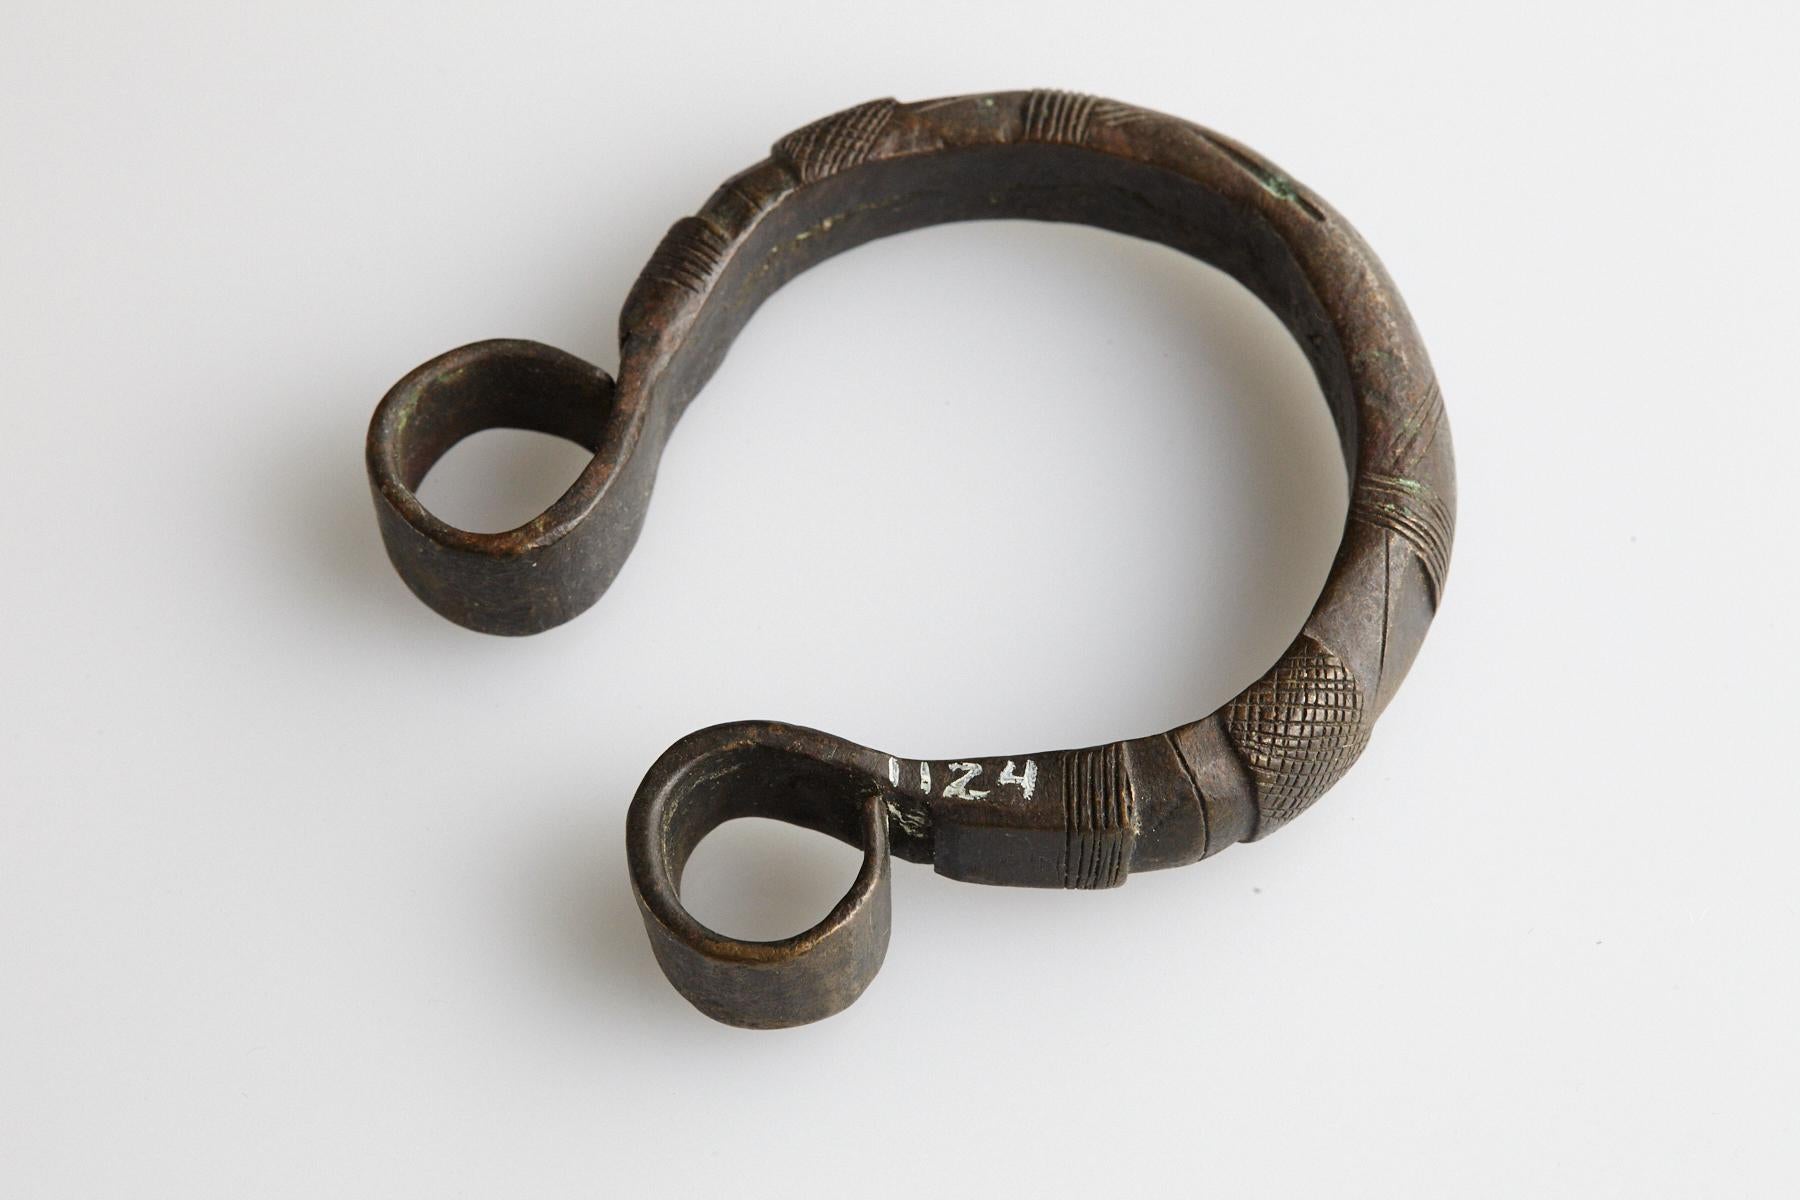 Early 20th-century brass currency bracelet / Manilla in horseshoe form with fixed opening. Hand-stamped and shaped graphical motives and the tips are in the shape of scrolls. This type of bracelet is worn by the Fulani and Gurma People, who are